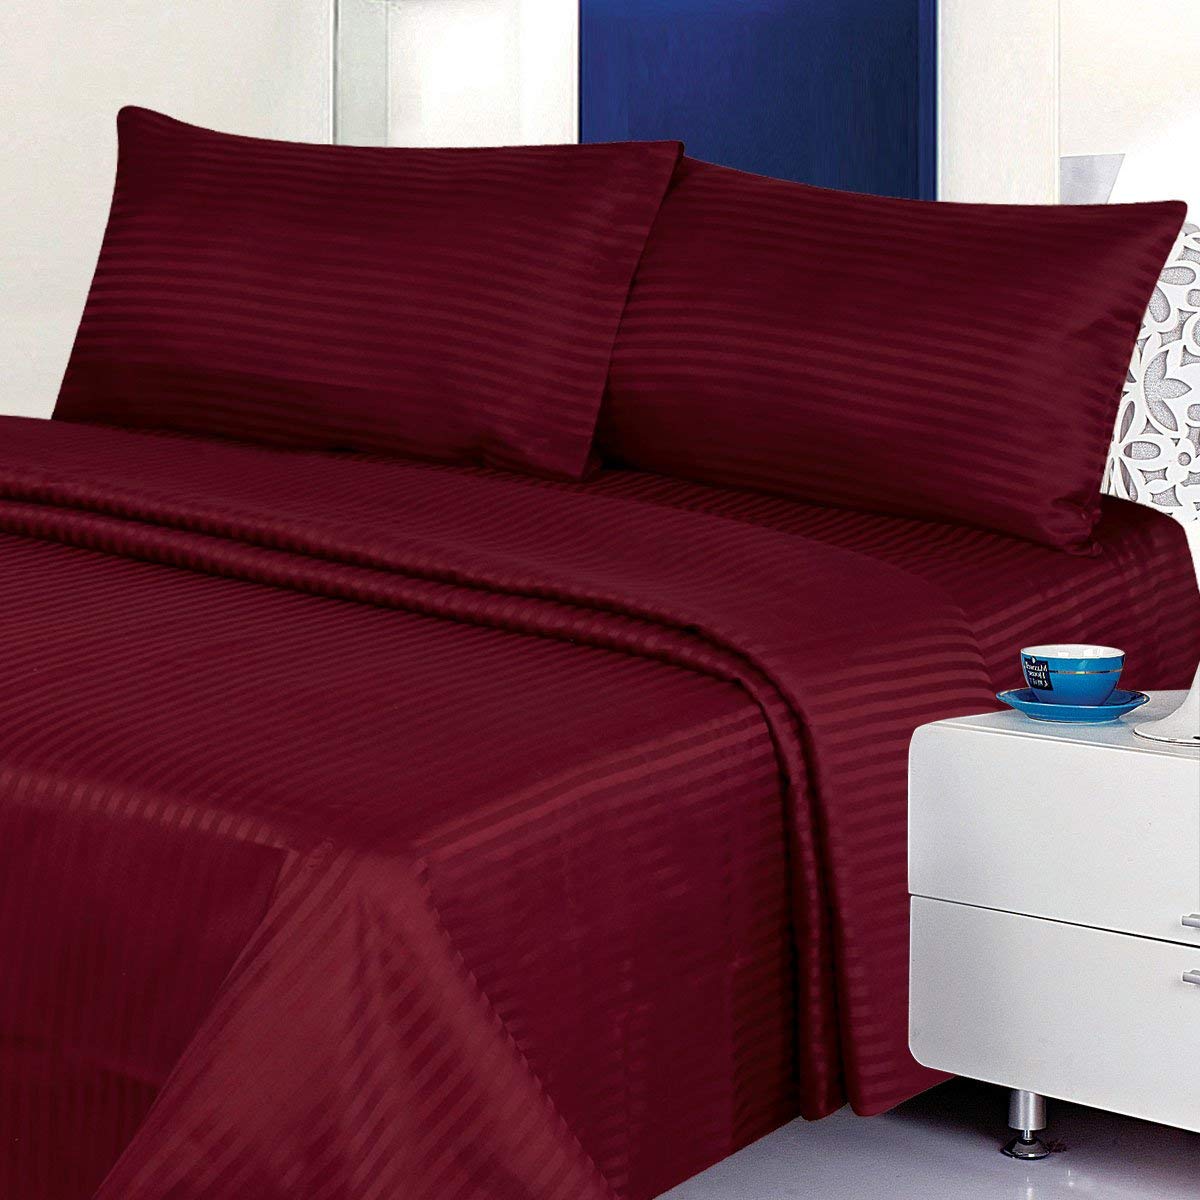 Book Cover Millenium Linen Queen Size Bed Sheet Set - Burgundy - 1600 Series 4 Piece - Deep Pocket - Cool and Wrinkle Fre e - 1 Fitted, 1 Flat, 2 Pillow Cases